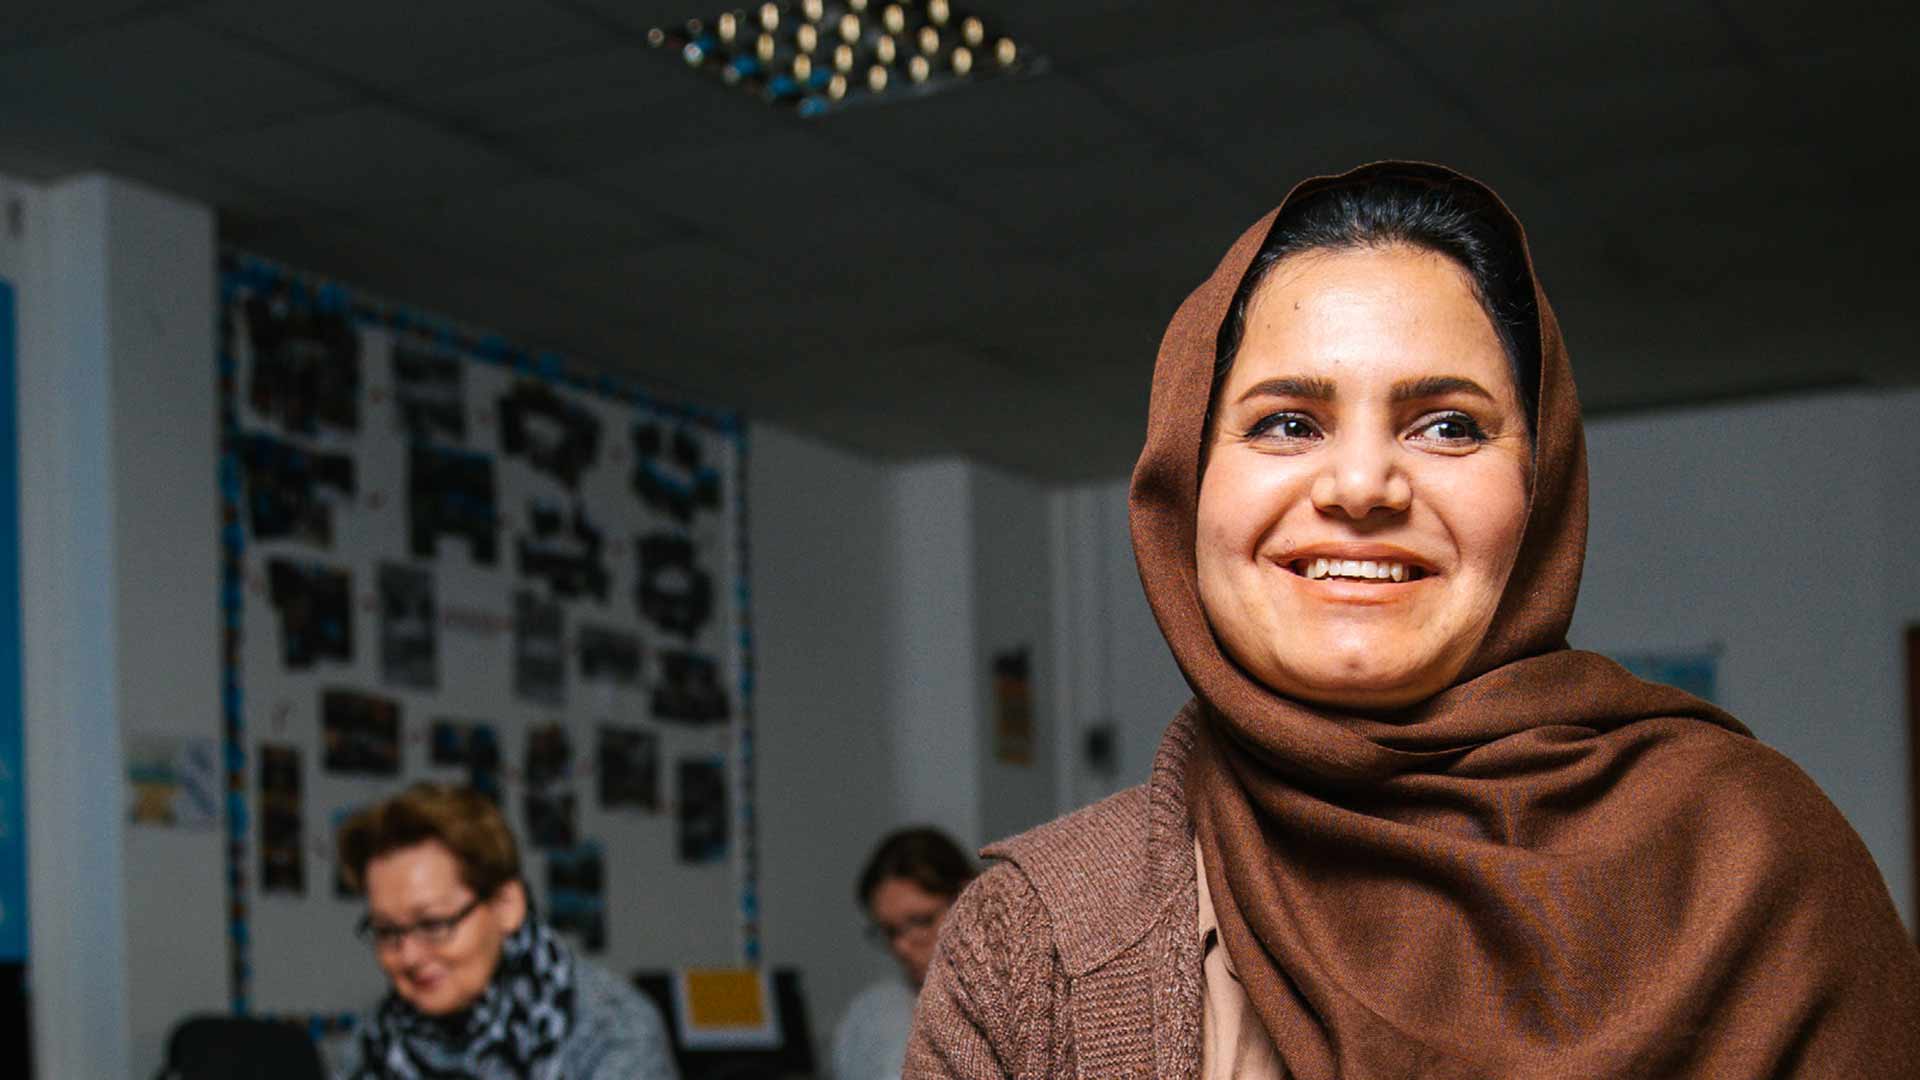 Student Rozhan sits smiling and looking off to the side. Behind Rozhan, other students are sat studying at their desks, and blurred in the background some student work is displayed on the rear wall